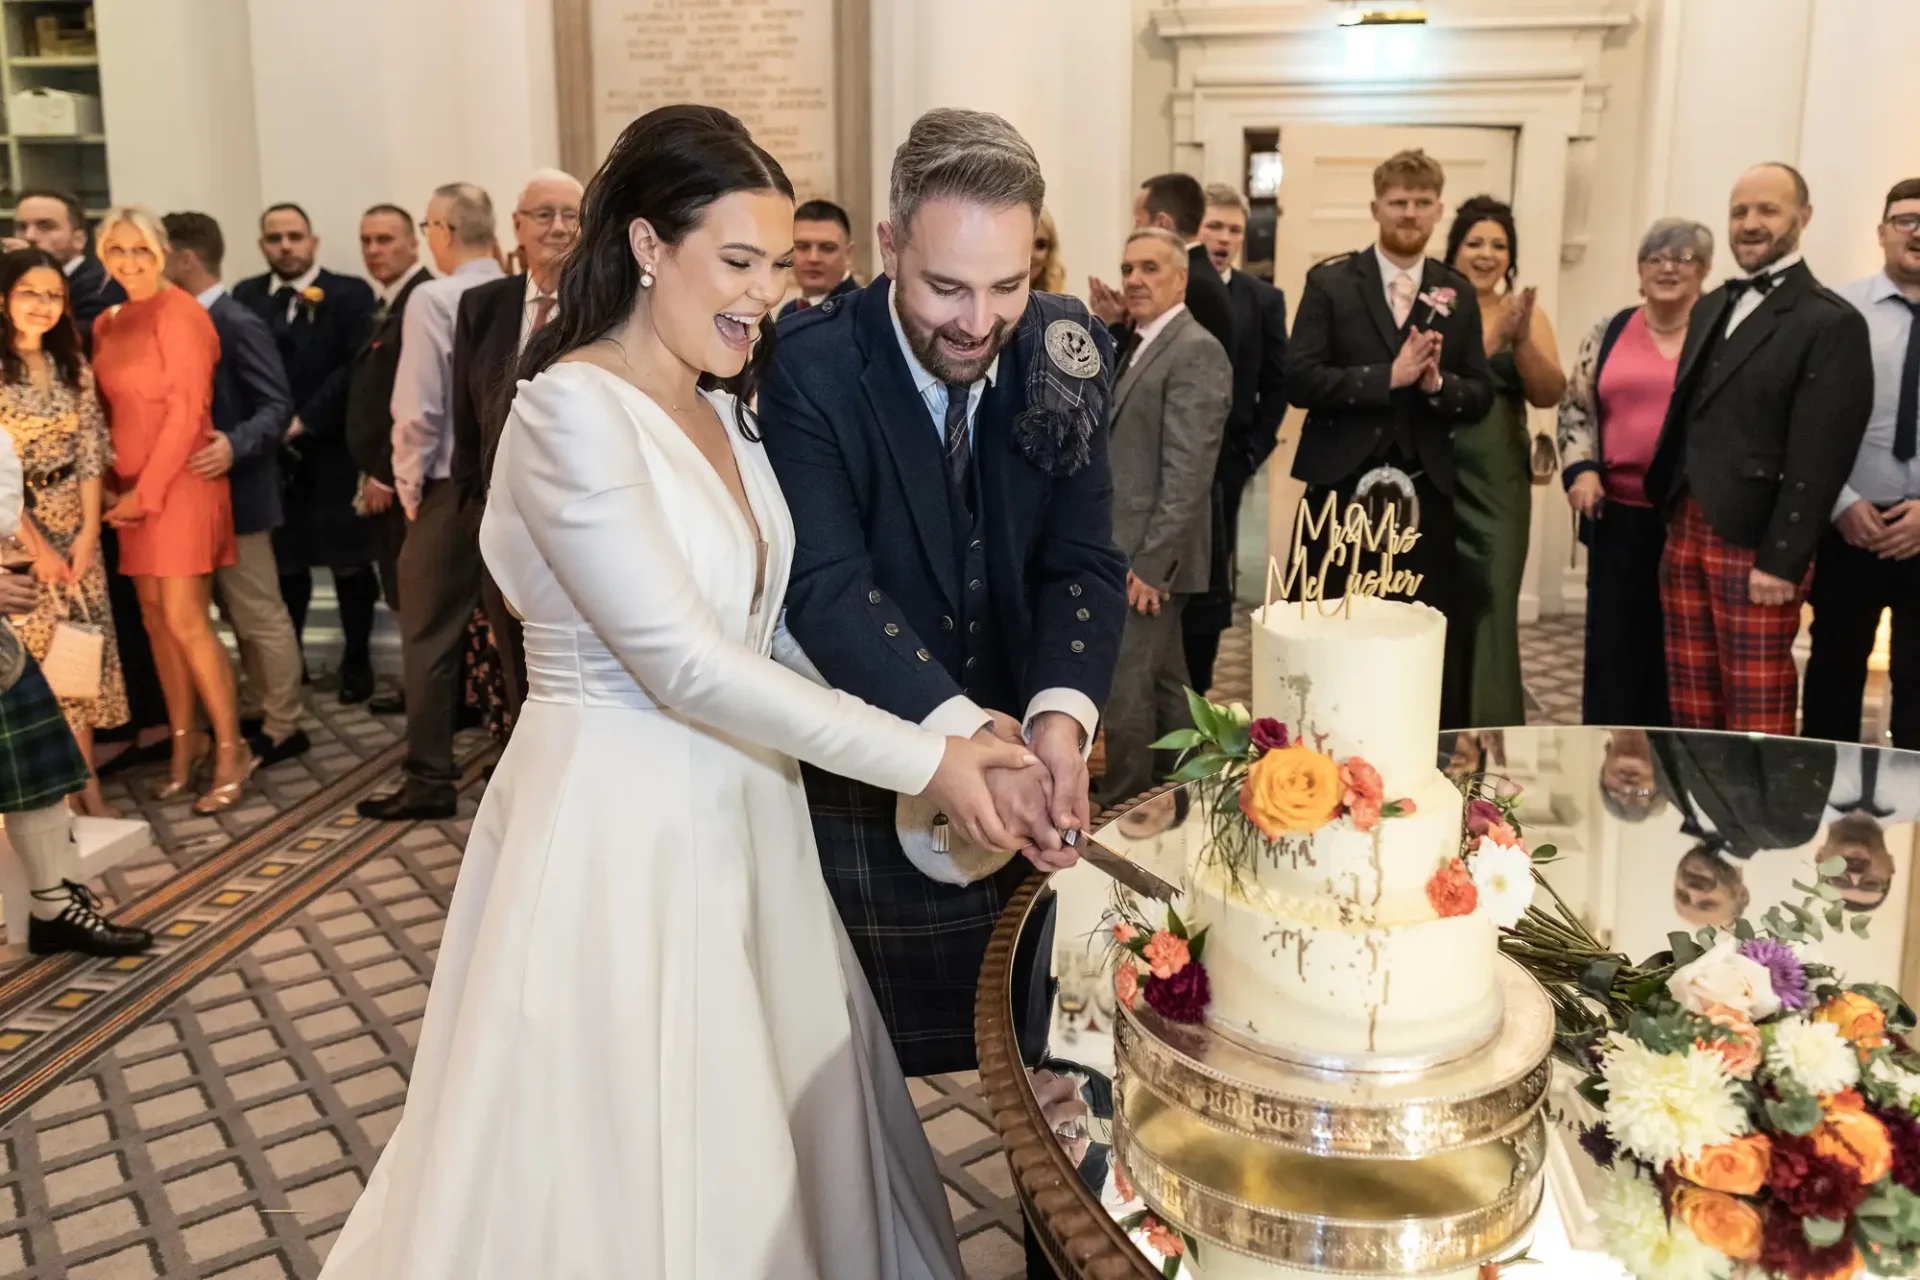 A bride and groom joyfully cutting a large, three-tiered wedding cake surrounded by guests in a decorated venue.